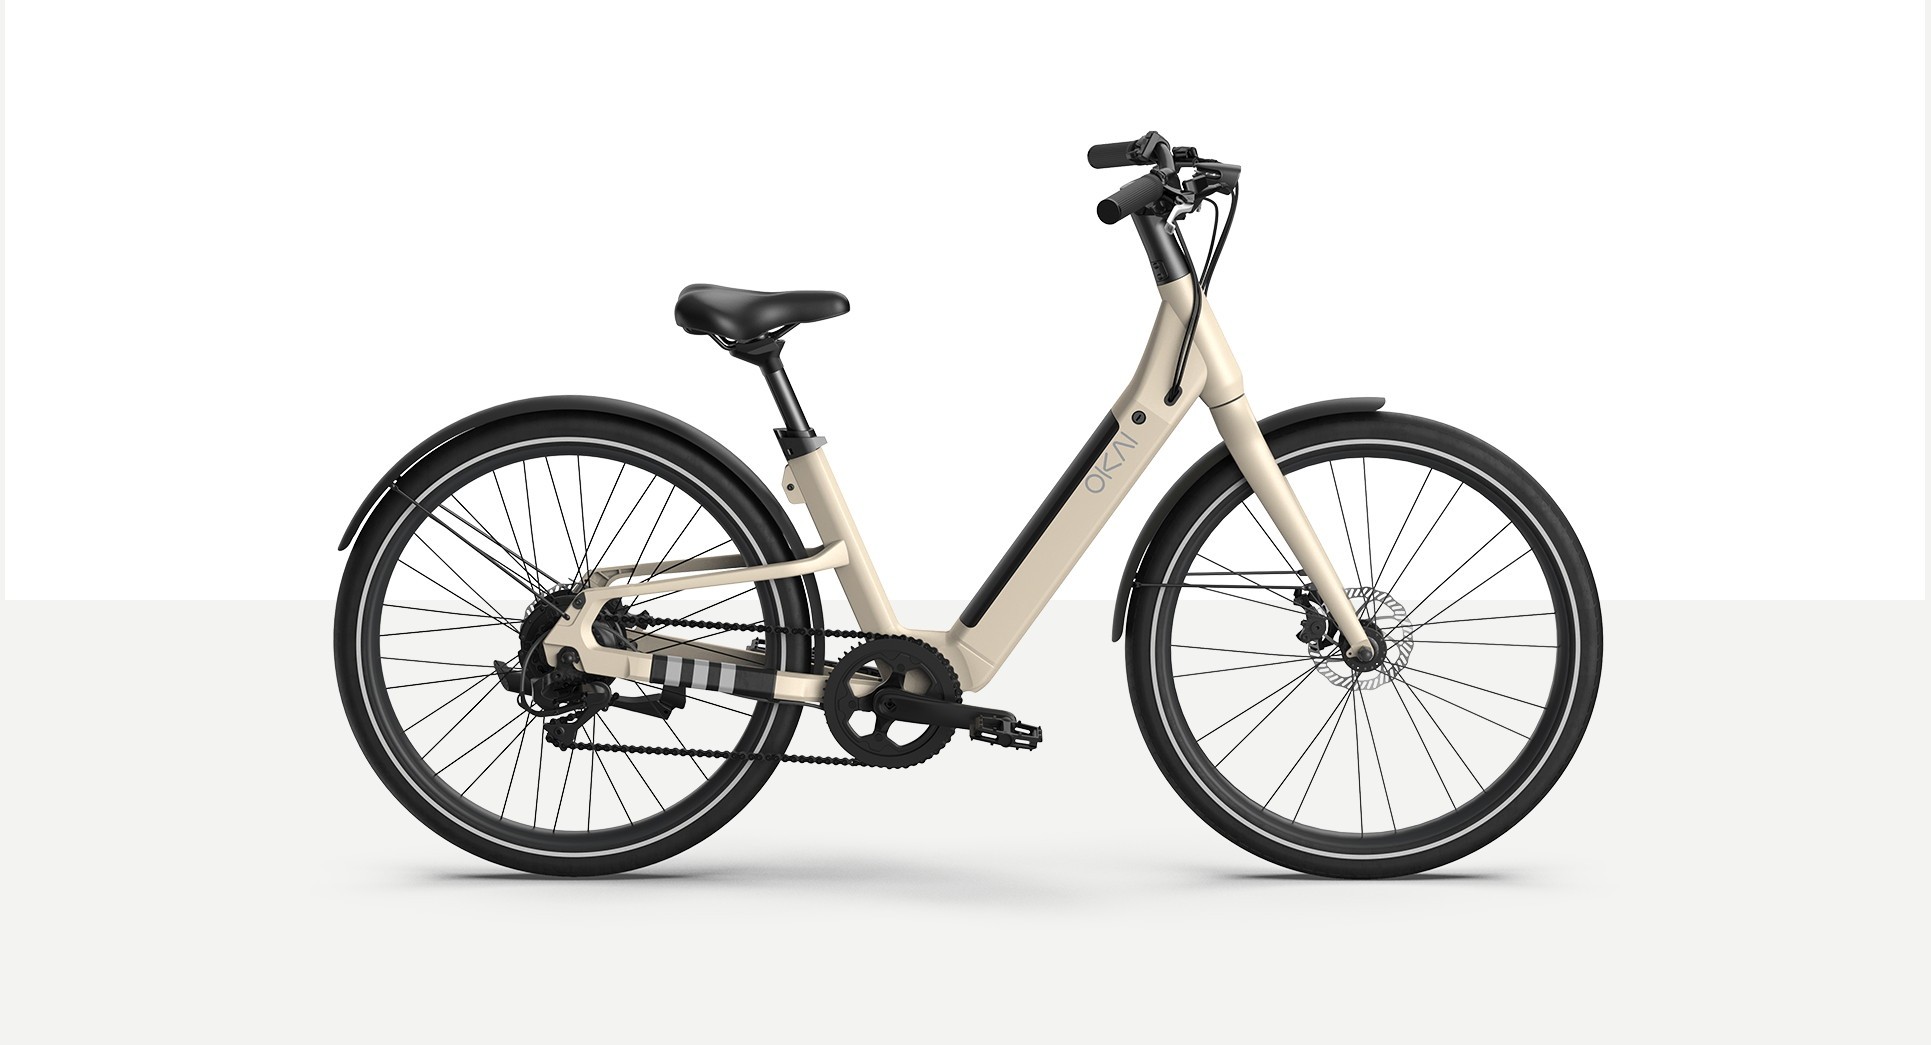 Searching for an Affordable and Speedy E-Bike To Ride Around Town ...